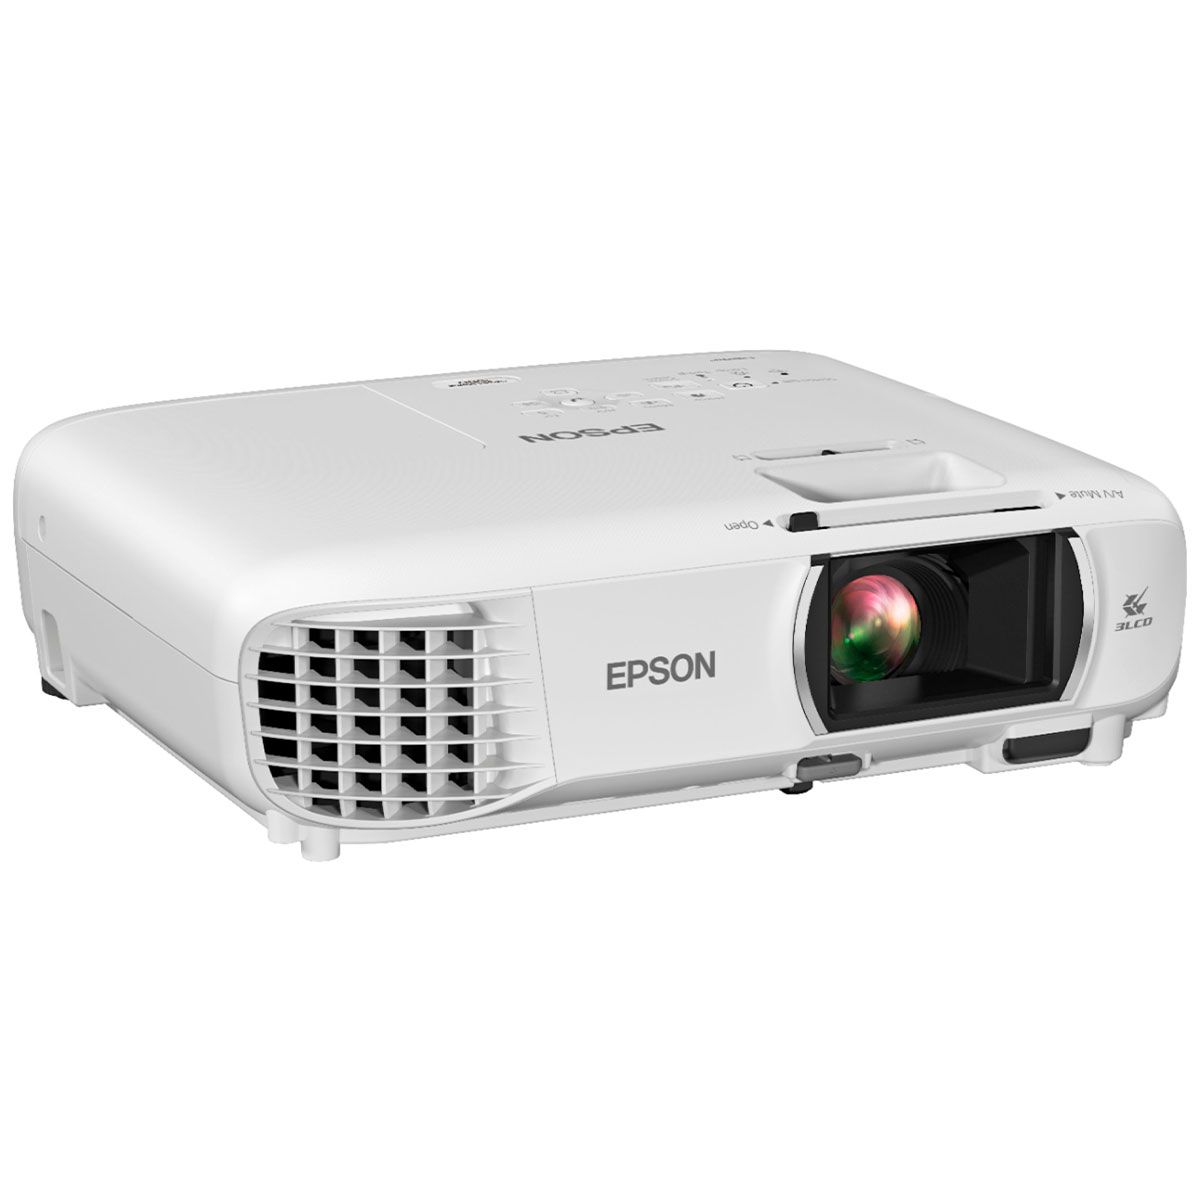 Epson 1080 Projector front side angle